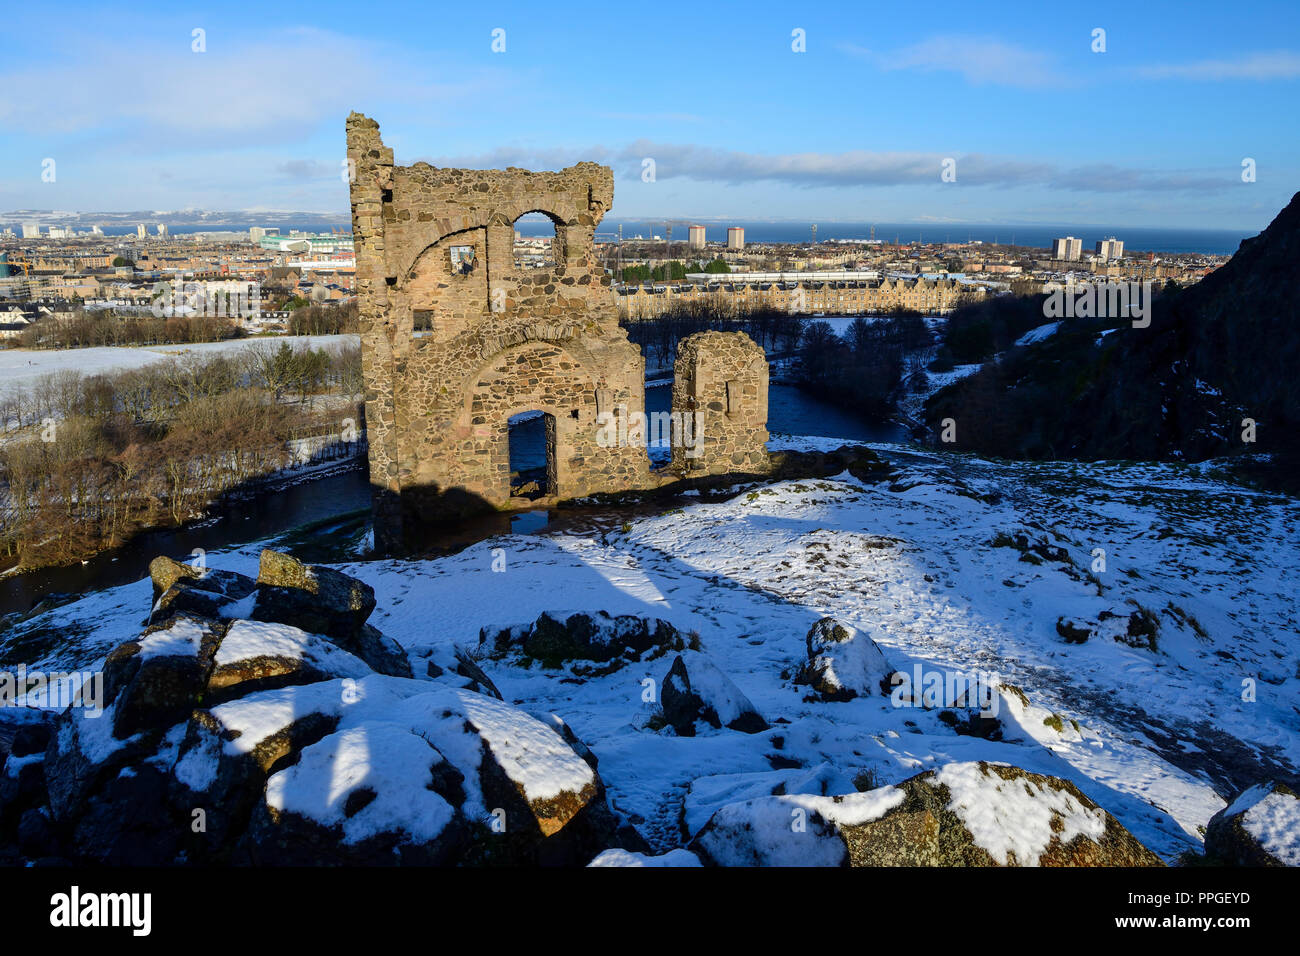 Ruins of St Anthony's Chapel in snow, with St Margaret's Loch in background, Holyrood Park, Edinburgh, Scotland Stock Photo